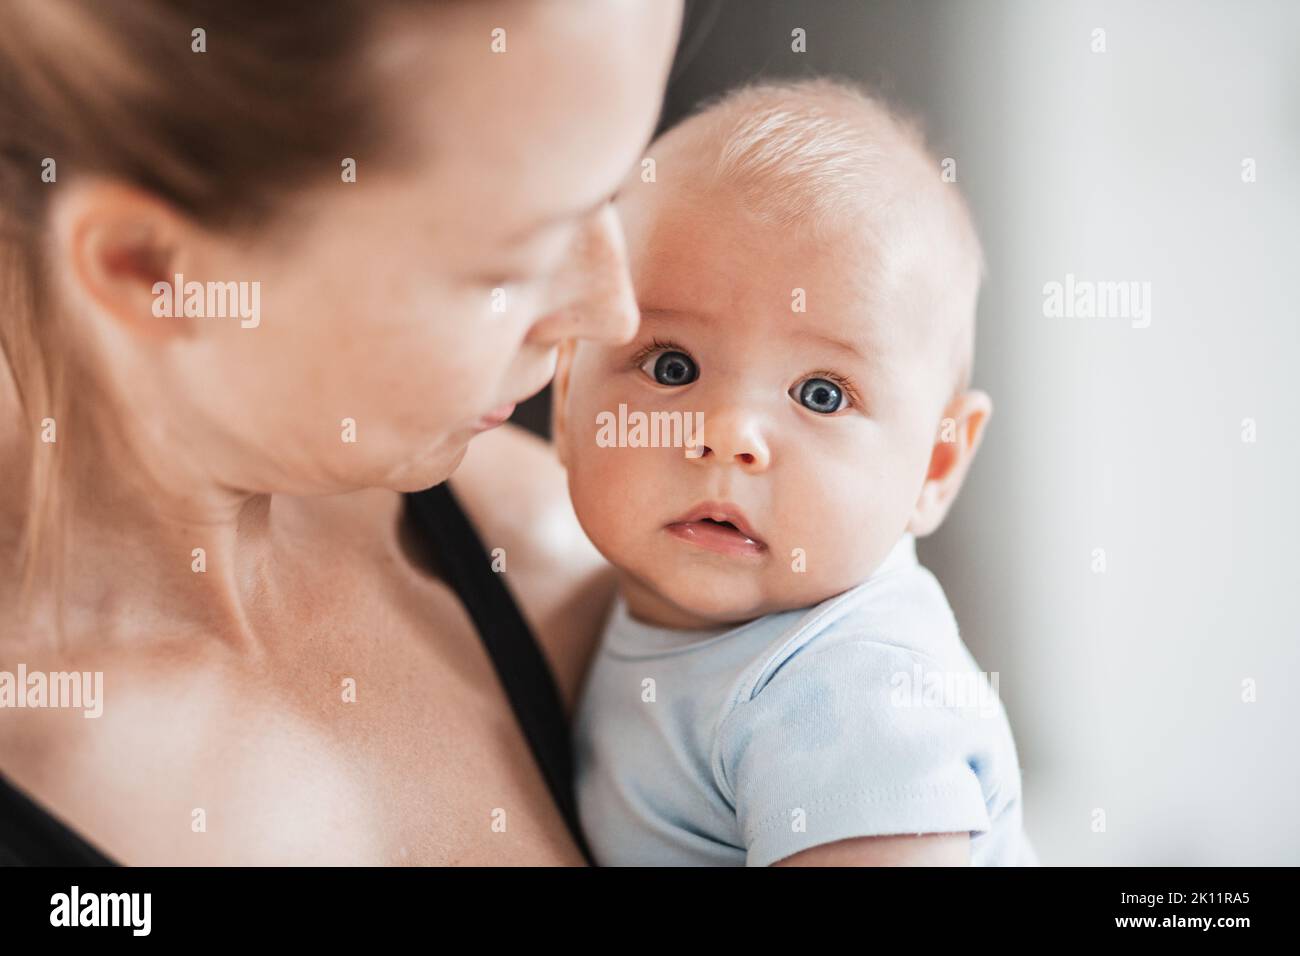 Portrait of sweet baby resting in mothers arms, looking at camera. New mom holding and cuddling little kid, embracing child with tenderness, love Stock Photo